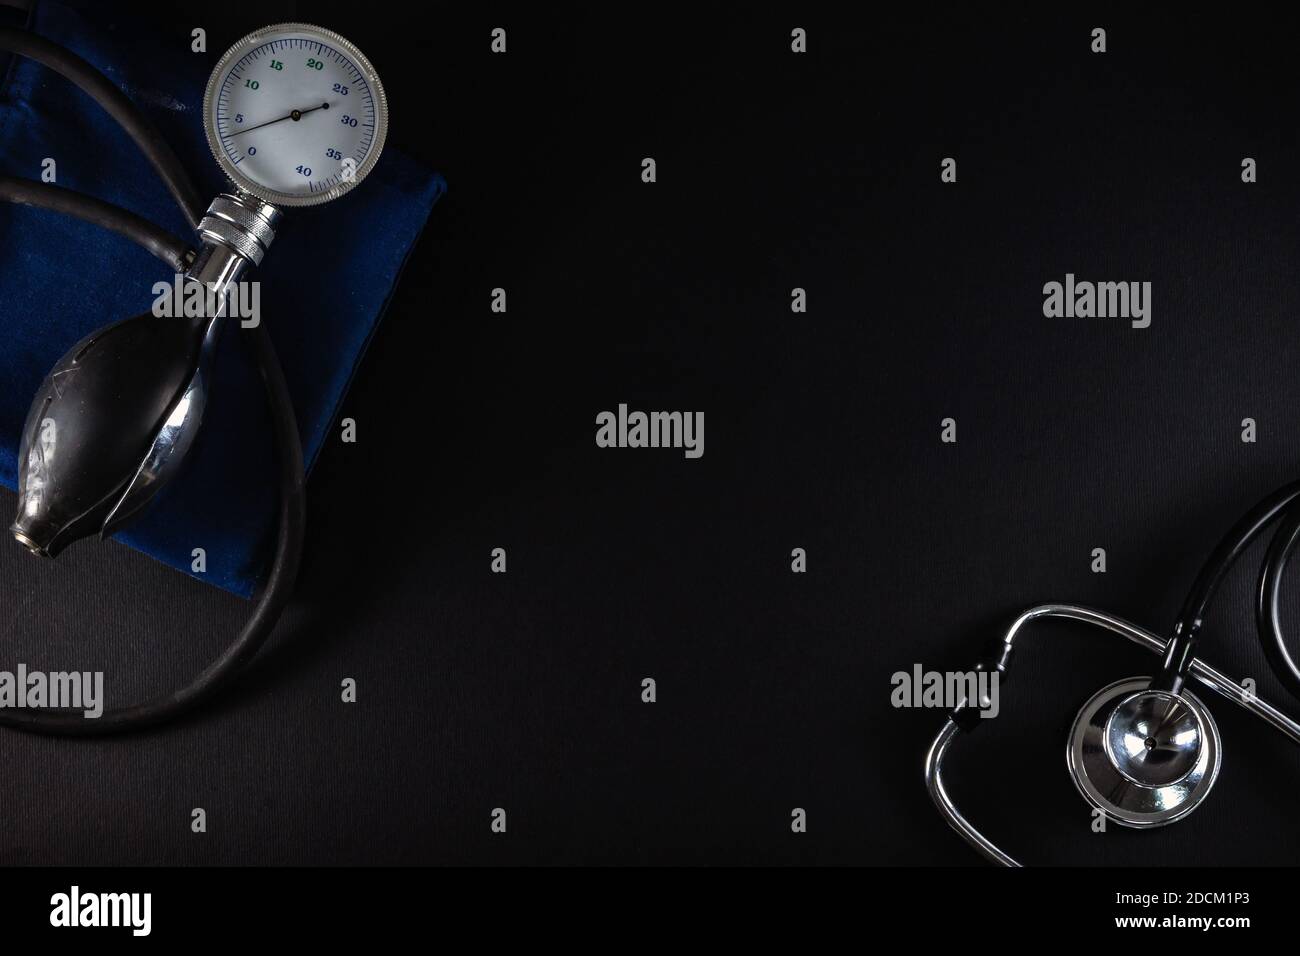 Old blood pressure meter monitor and stethoscope phonendoscope isolated on black background. Health care concept, top view. Stock Photo